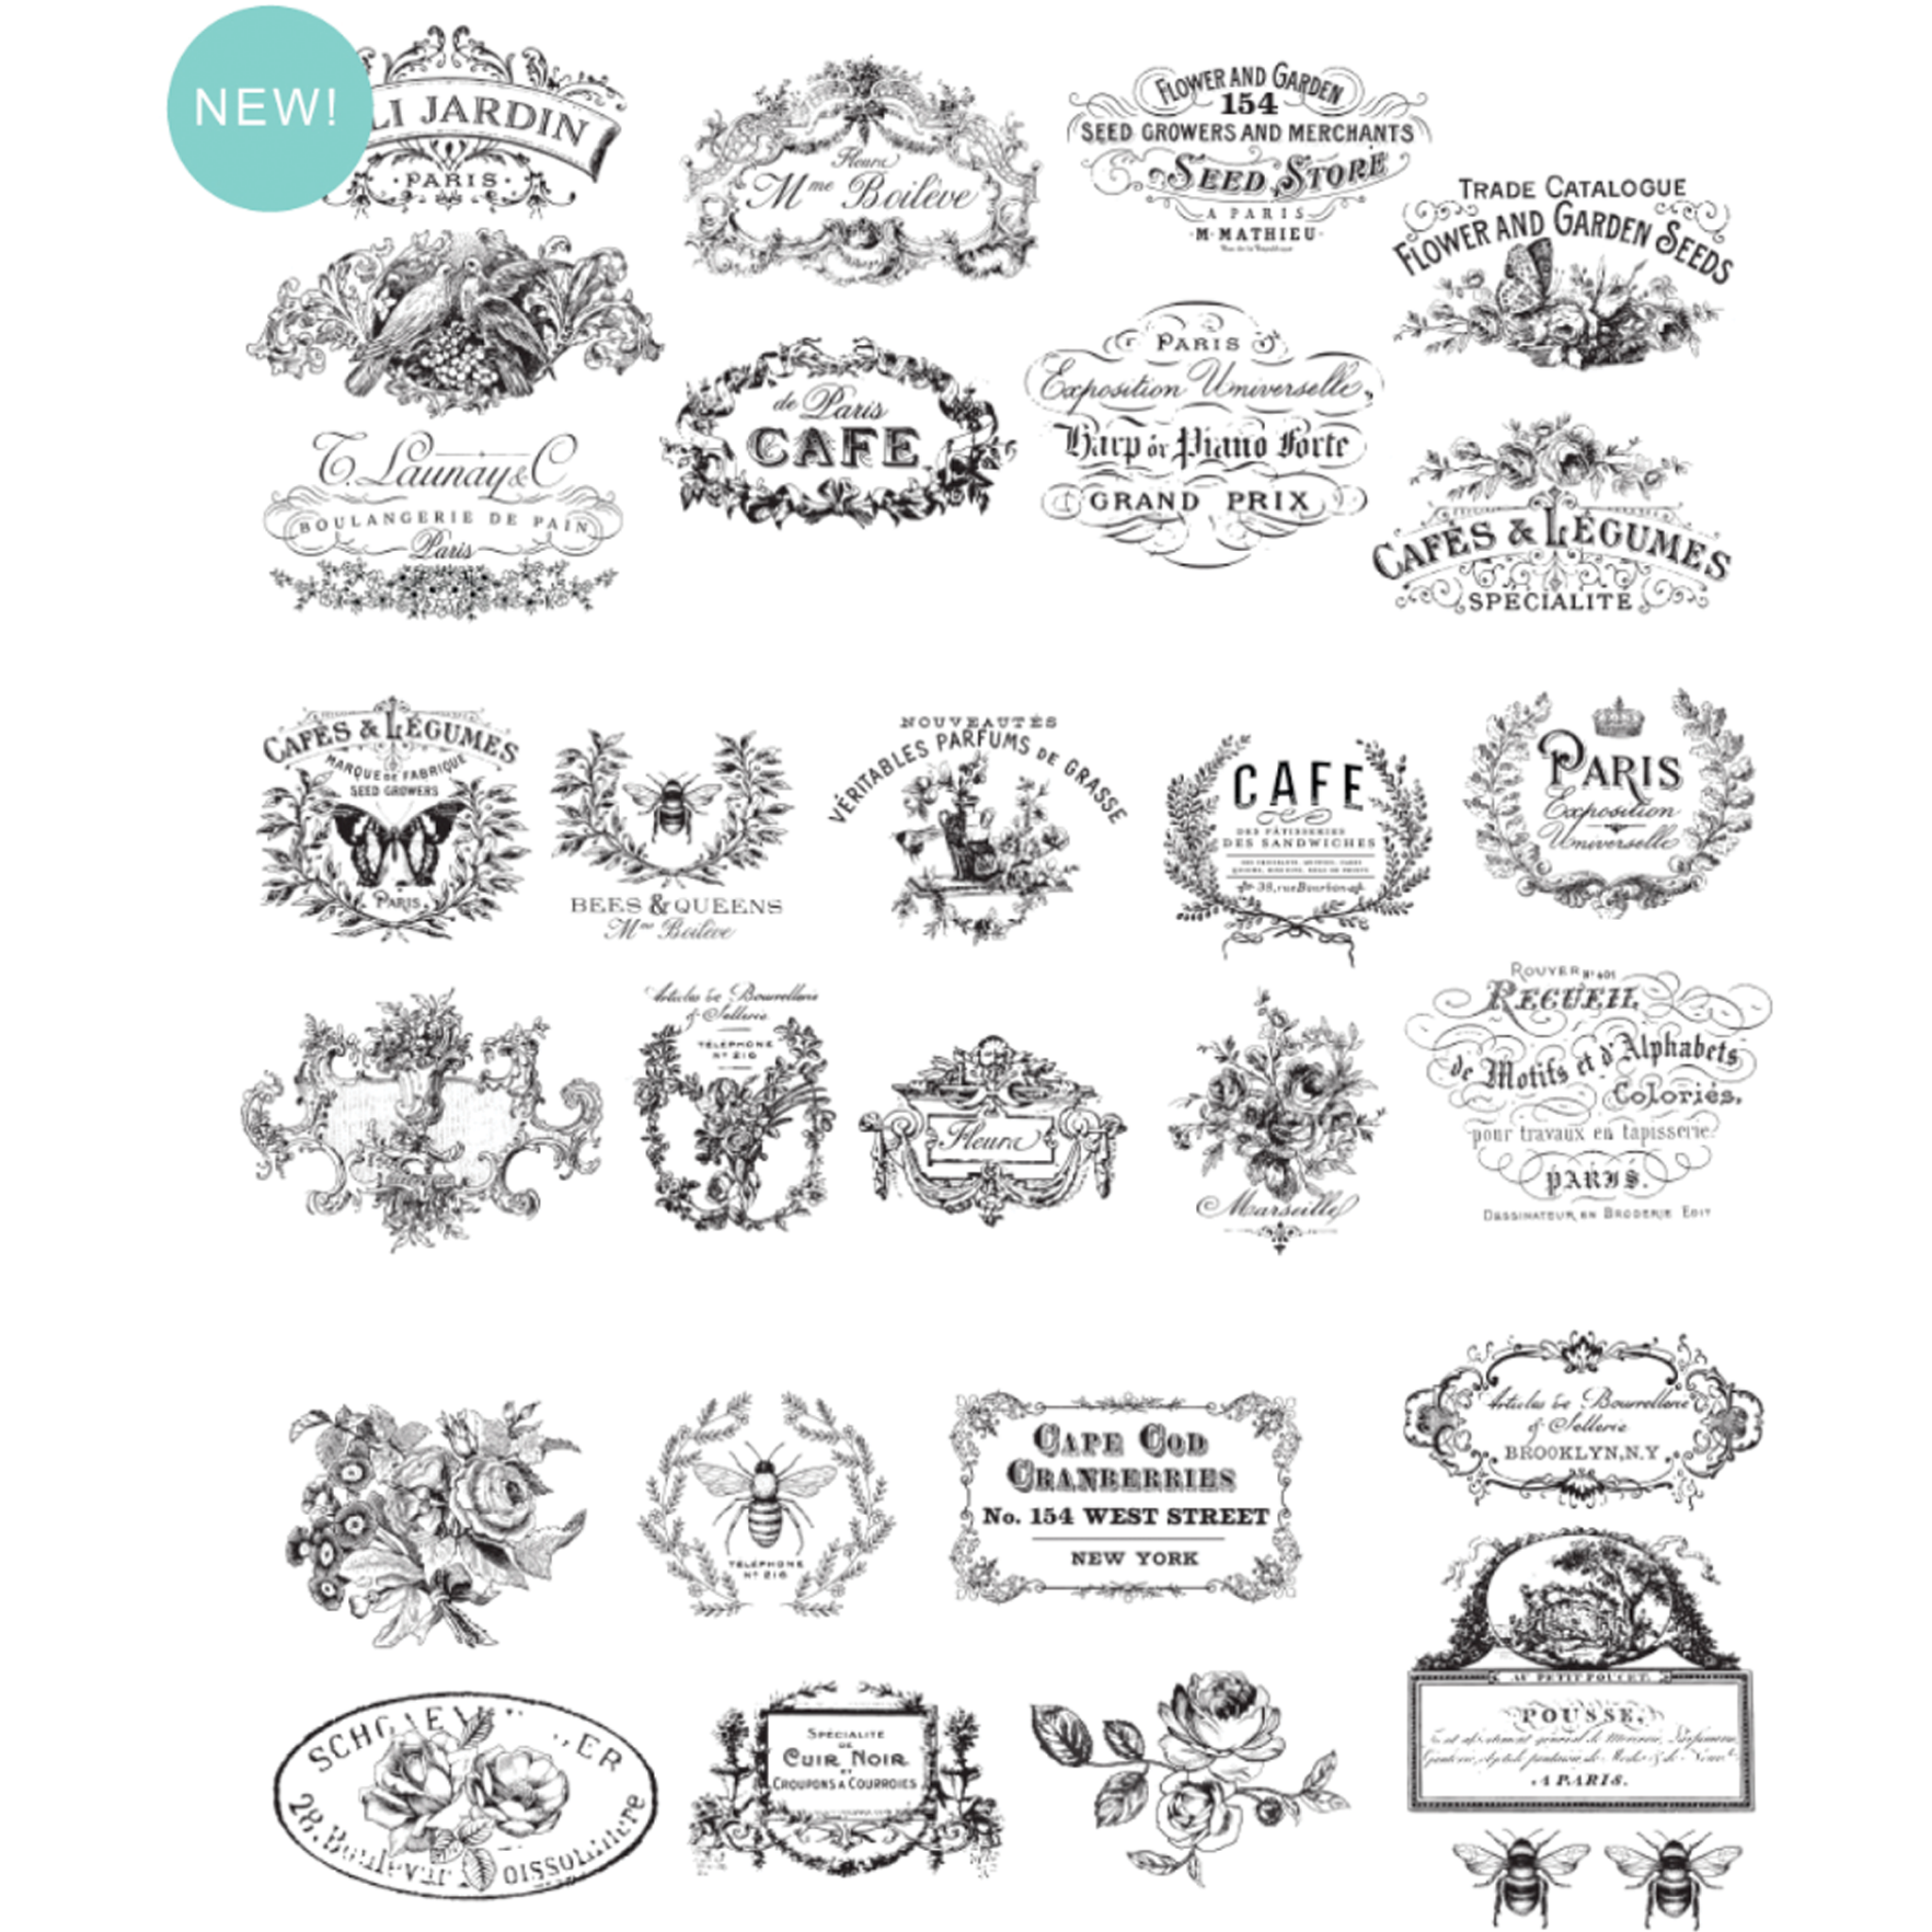 On a white background that has 26 different vintage labels, French and English that are in black.